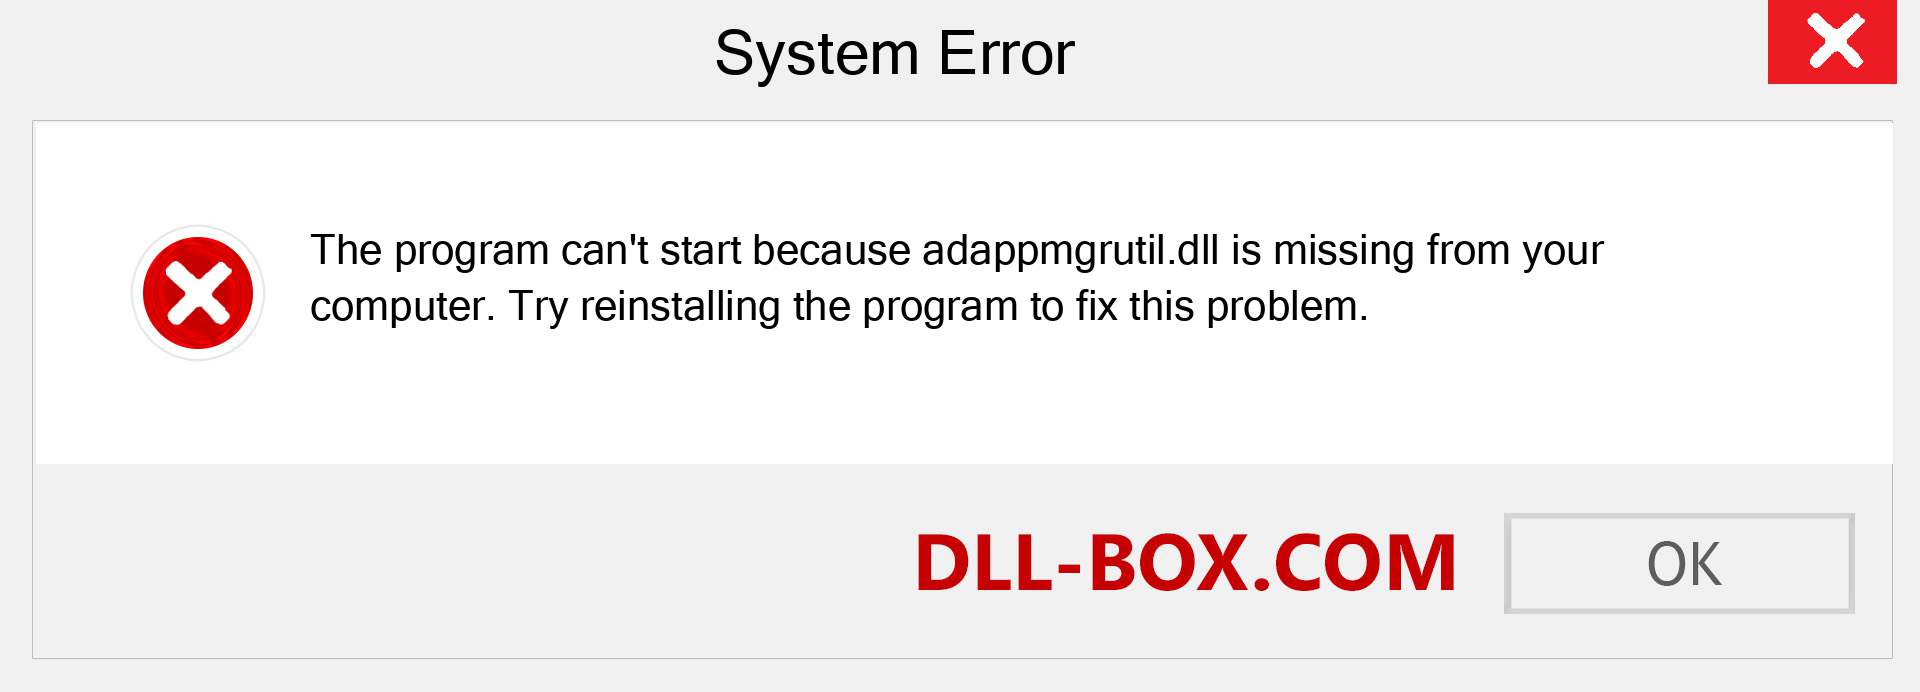  adappmgrutil.dll file is missing?. Download for Windows 7, 8, 10 - Fix  adappmgrutil dll Missing Error on Windows, photos, images